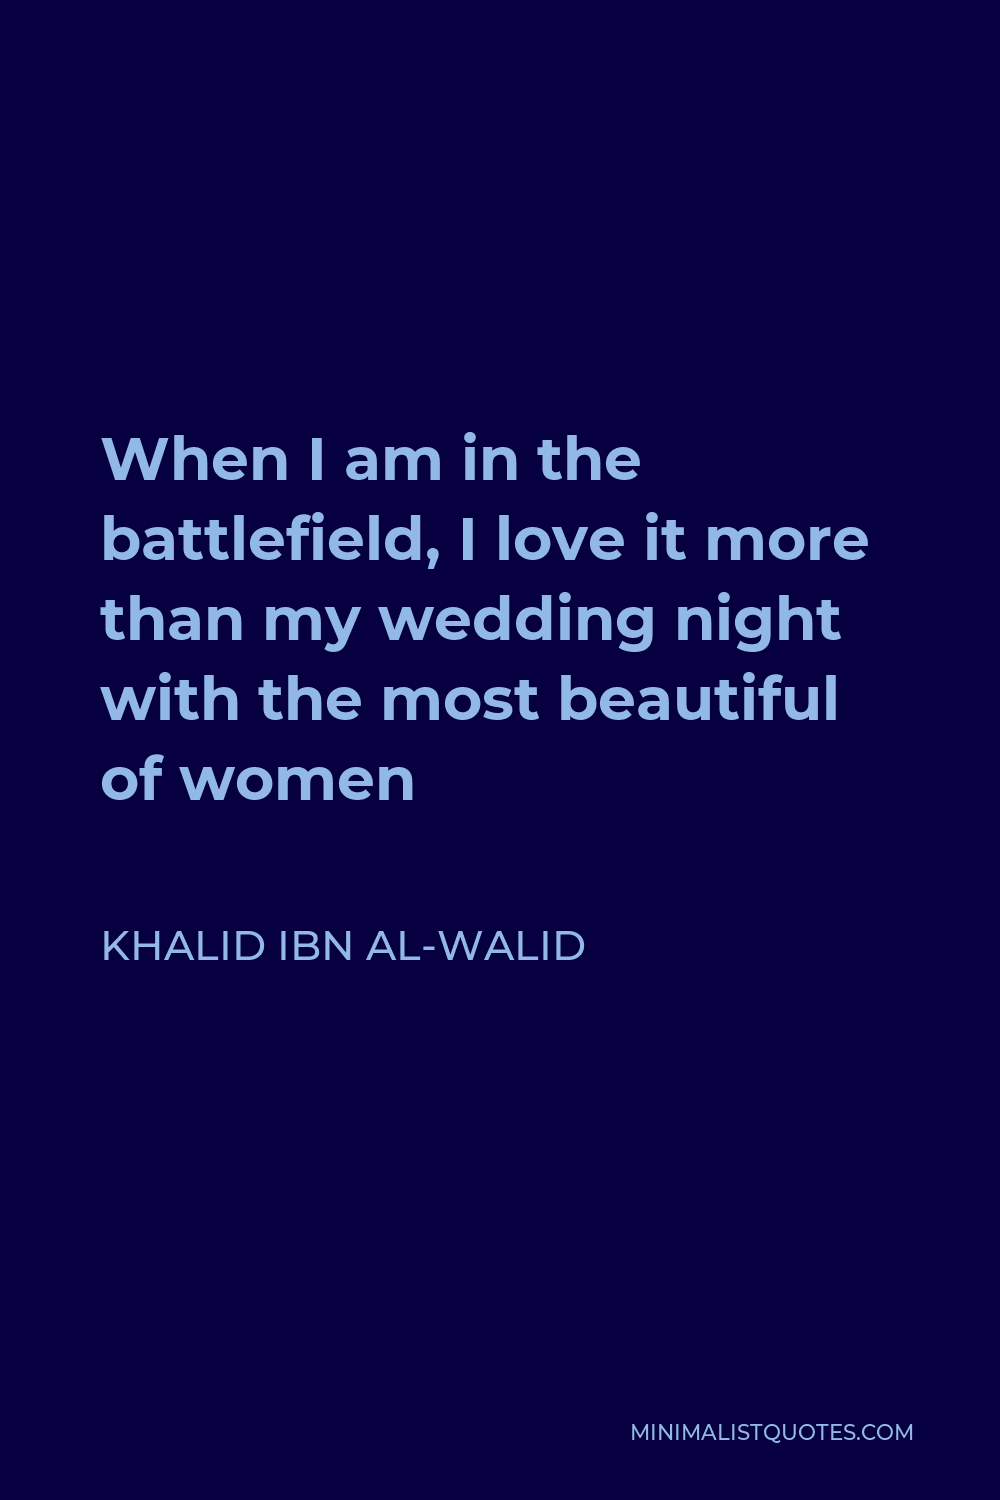 Khalid ibn al-Walid Quote - When I am in the battlefield, I love it more than my wedding night with the most beautiful of women